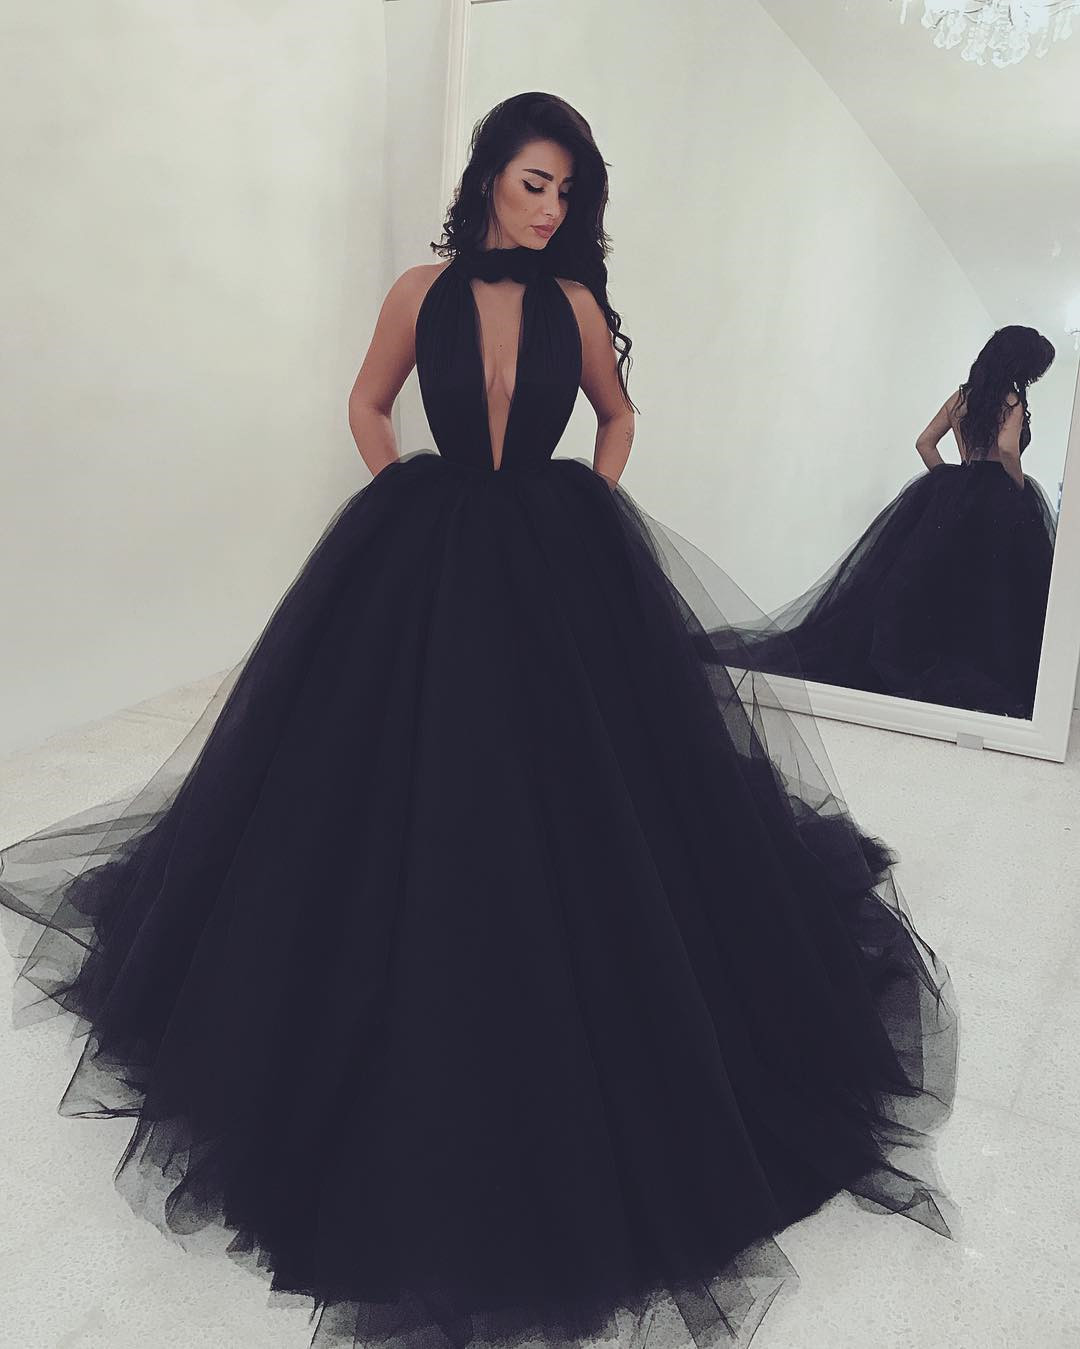 Black Prom Dresses,ball Gowns Prom Dress,sexy Prom Dress,long Formal Dress,prom Dress 2017